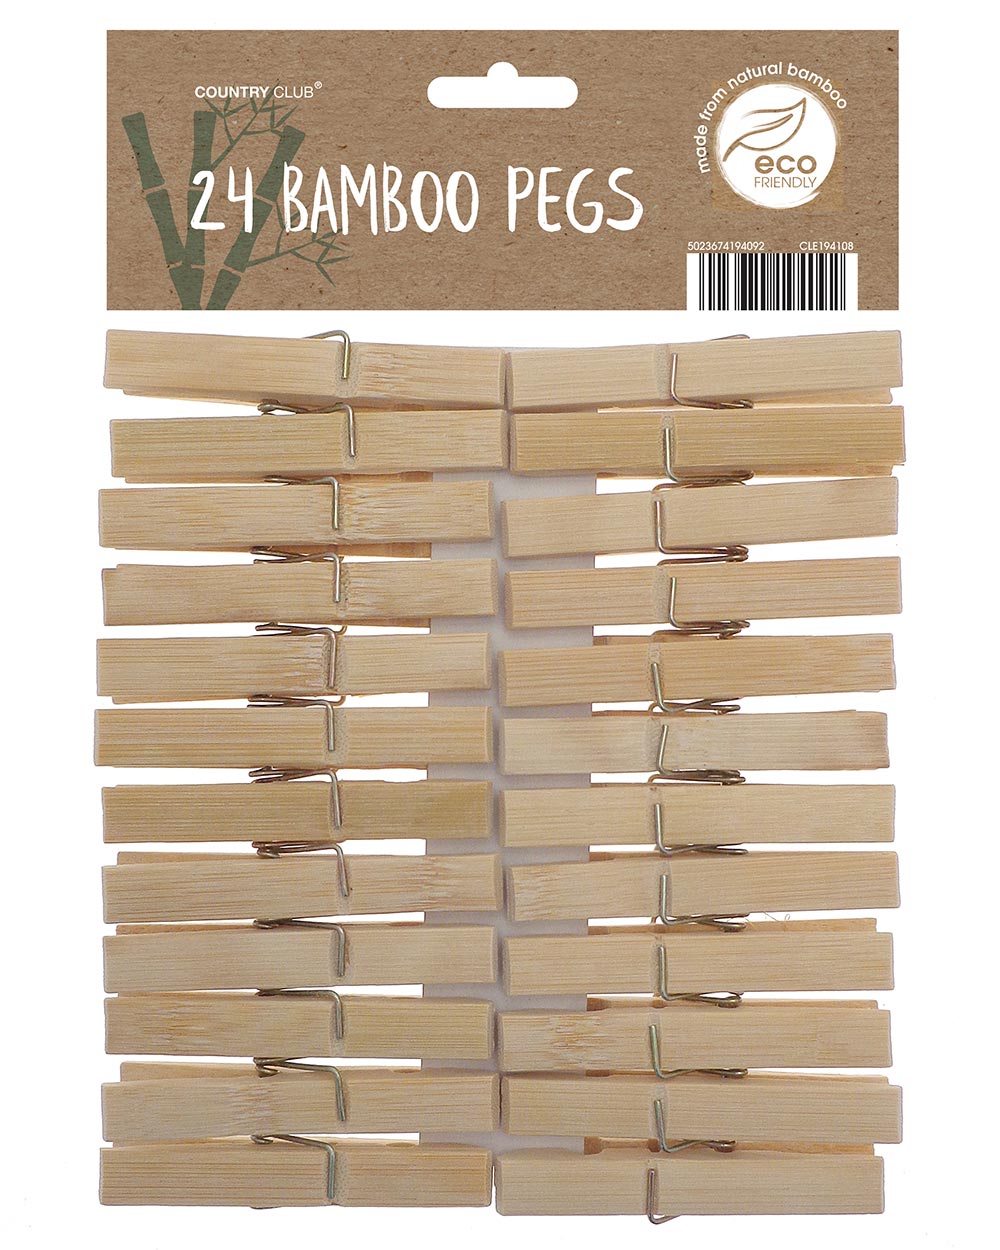 These bamboo clothes pegs are a sustainable alternative to plastic pegs. Made from bamboo which is bio-degradable and steel springs which are endlessly recyclable. 24 in a pack